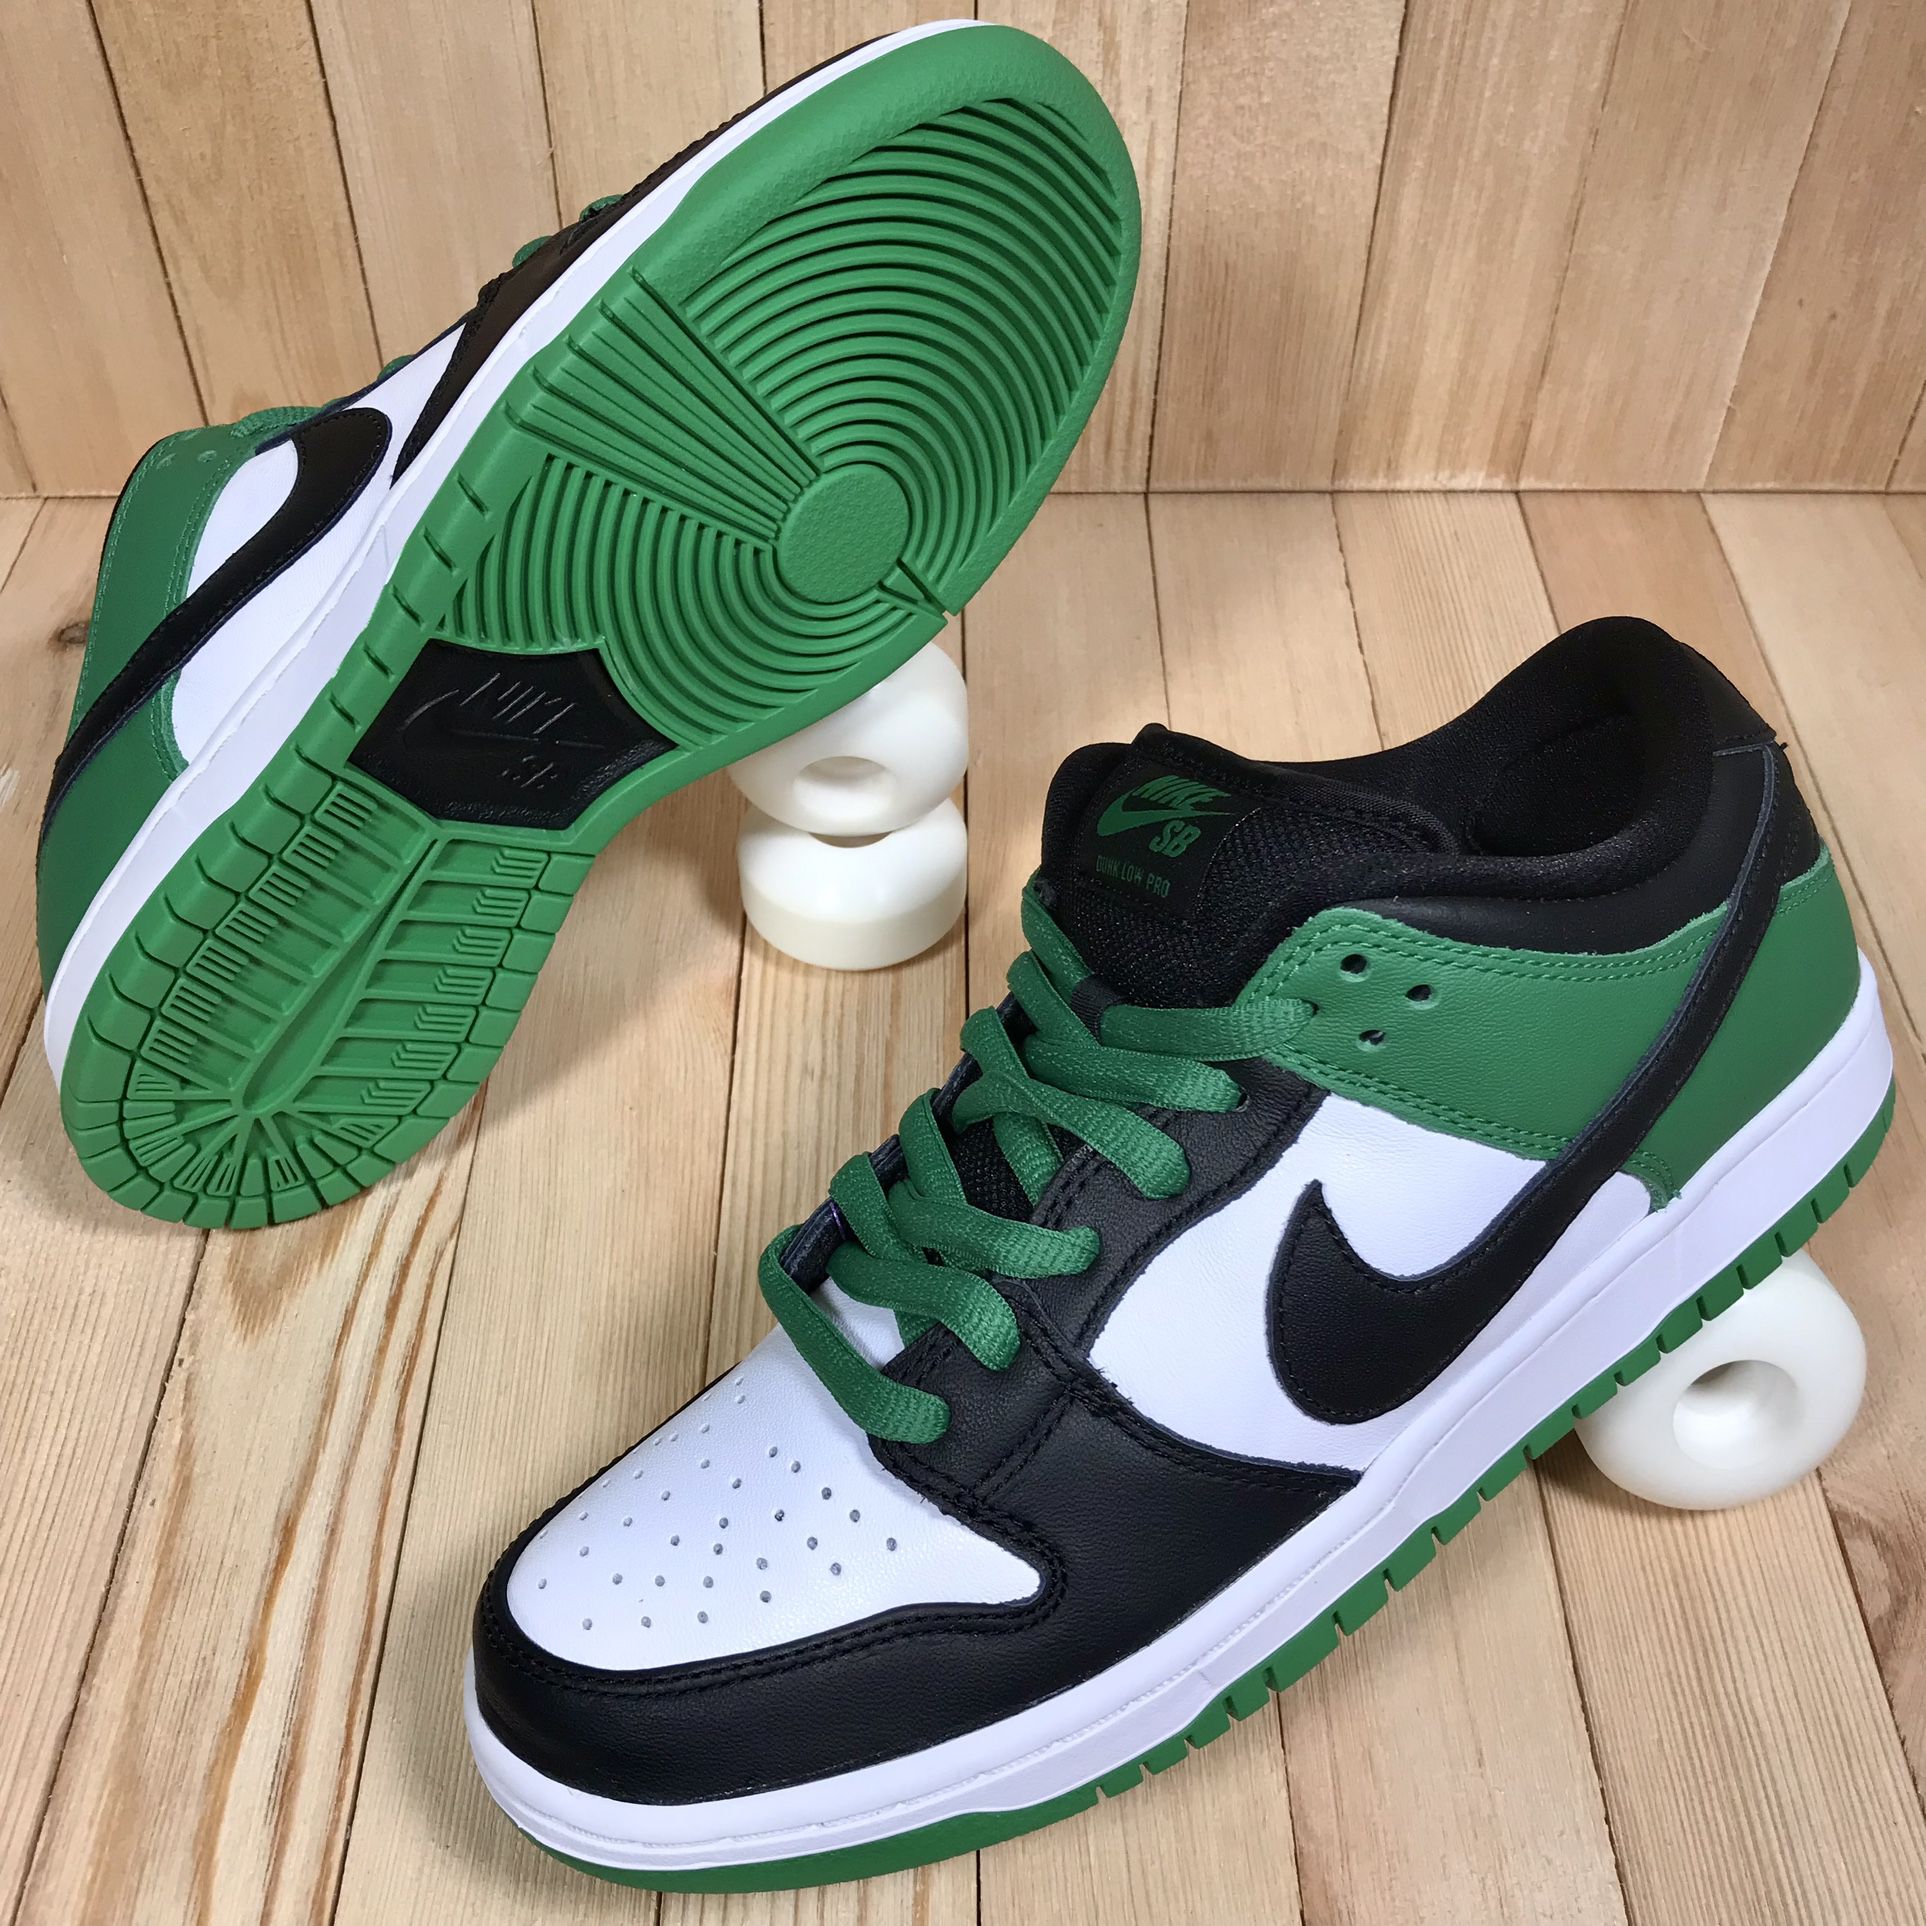 Nike SB Dunk Low Pro Classic Green Black White Skate Shoes Sneakers Men’s Size 7 Brand New in Box BNIB Deadstock DS